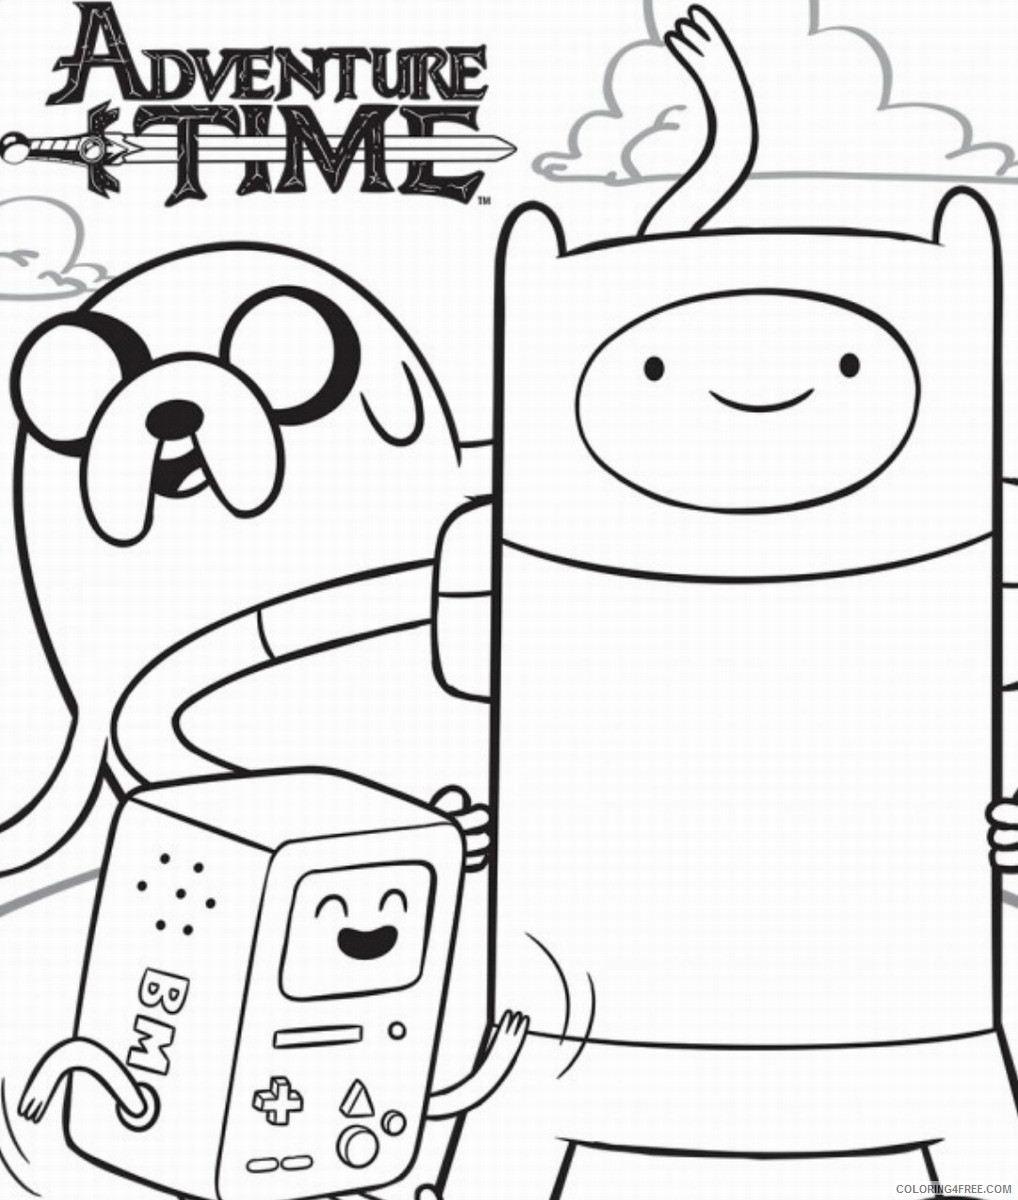 Adventure Time Coloring Pages Cartoons adventure_time_coloring4 Printable 2020 0226 Coloring4free